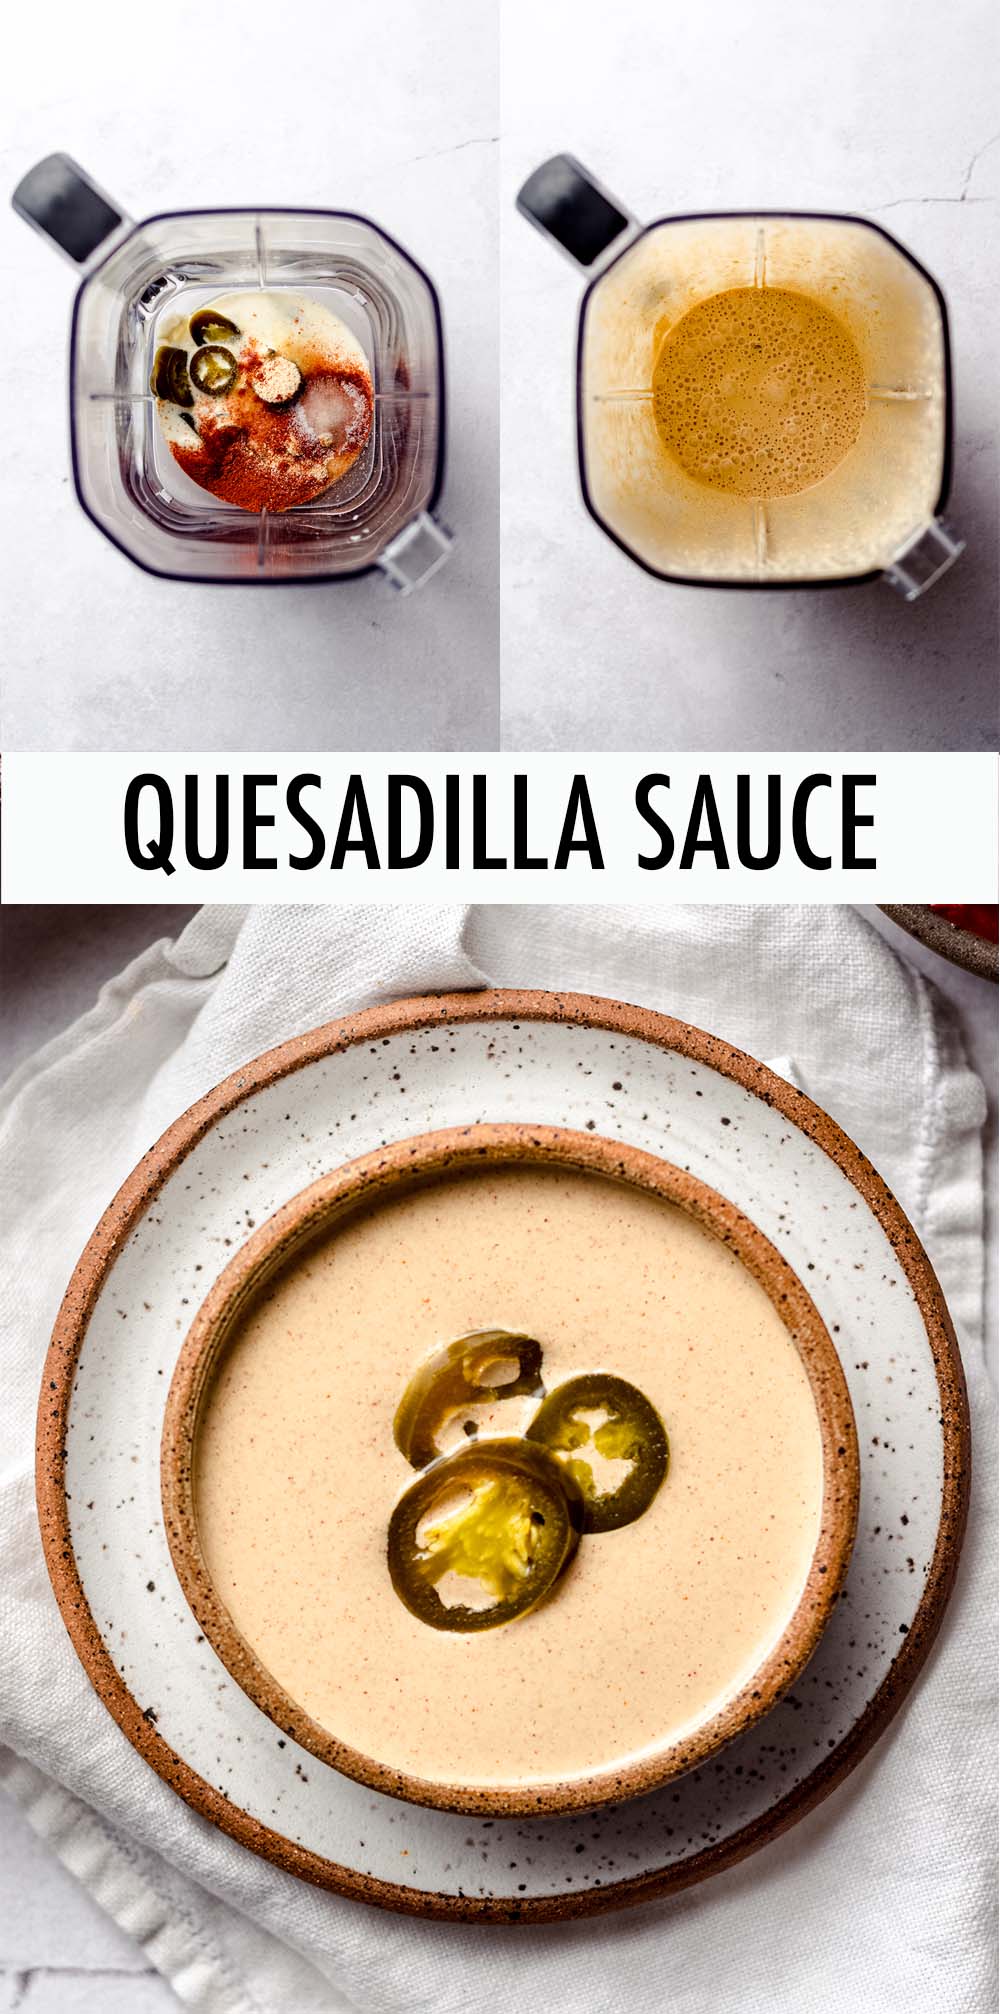 Make this creamy jalapeño sauce entirely in your blender, then add it to all of your homemade quesadillas for some extra zing (or dip your quesadillas right into the sauce). It's also great for chips, nachos, tacos, and taco salads! via @frshaprilflours